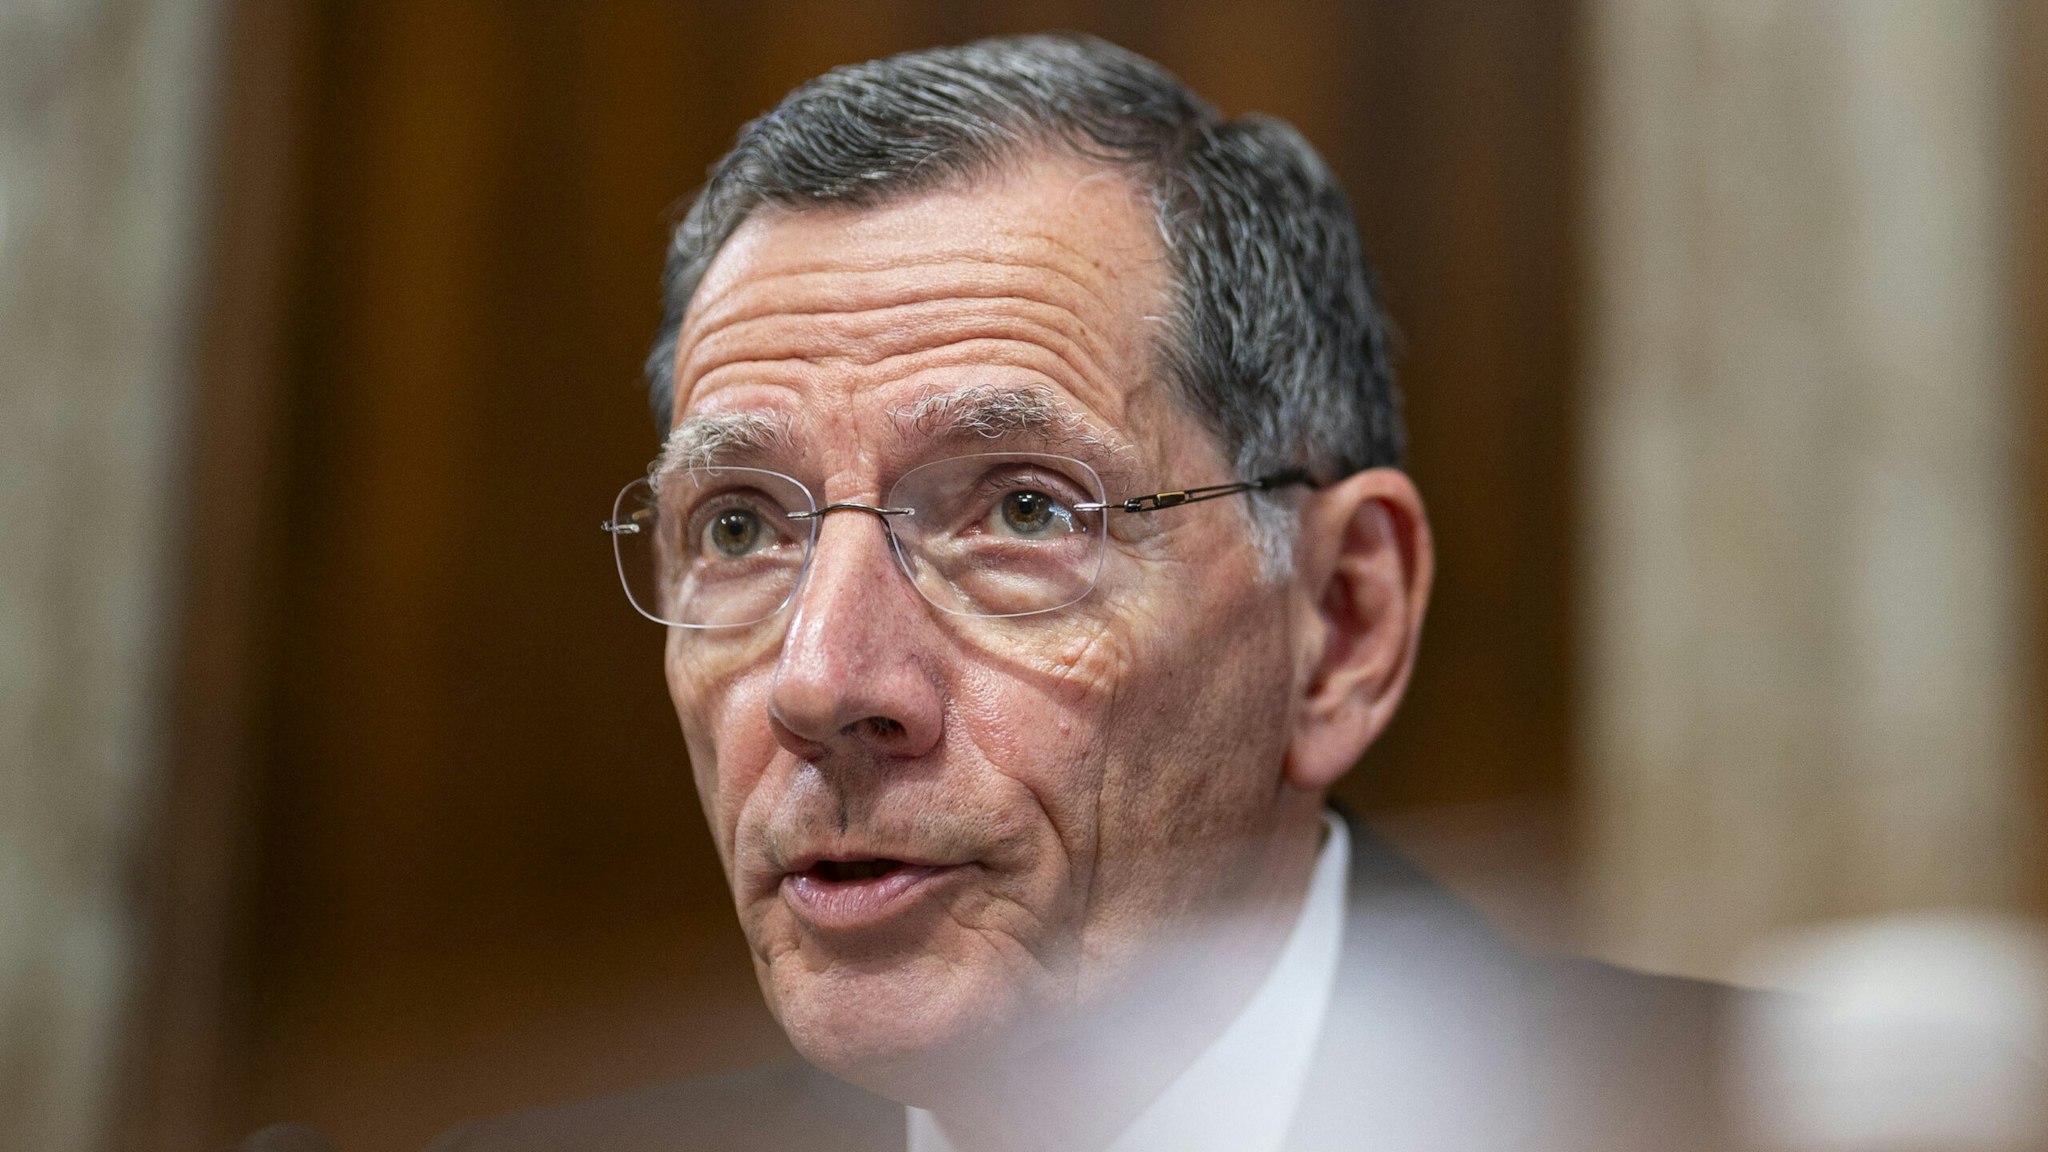 Senator John Barrasso, a Republican from Wyoming and ranking member of the Senate Energy and Natural Resources Committee, speaks during a hearing in Washington, DC, US, on Thursday, Sept. 7, 2023. The hearing is titled Examine Recent Advances in Artificial Intelligence and the Department of Energys Role in Ensuring U.S. Competitiveness and Security in Emerging Technologies.